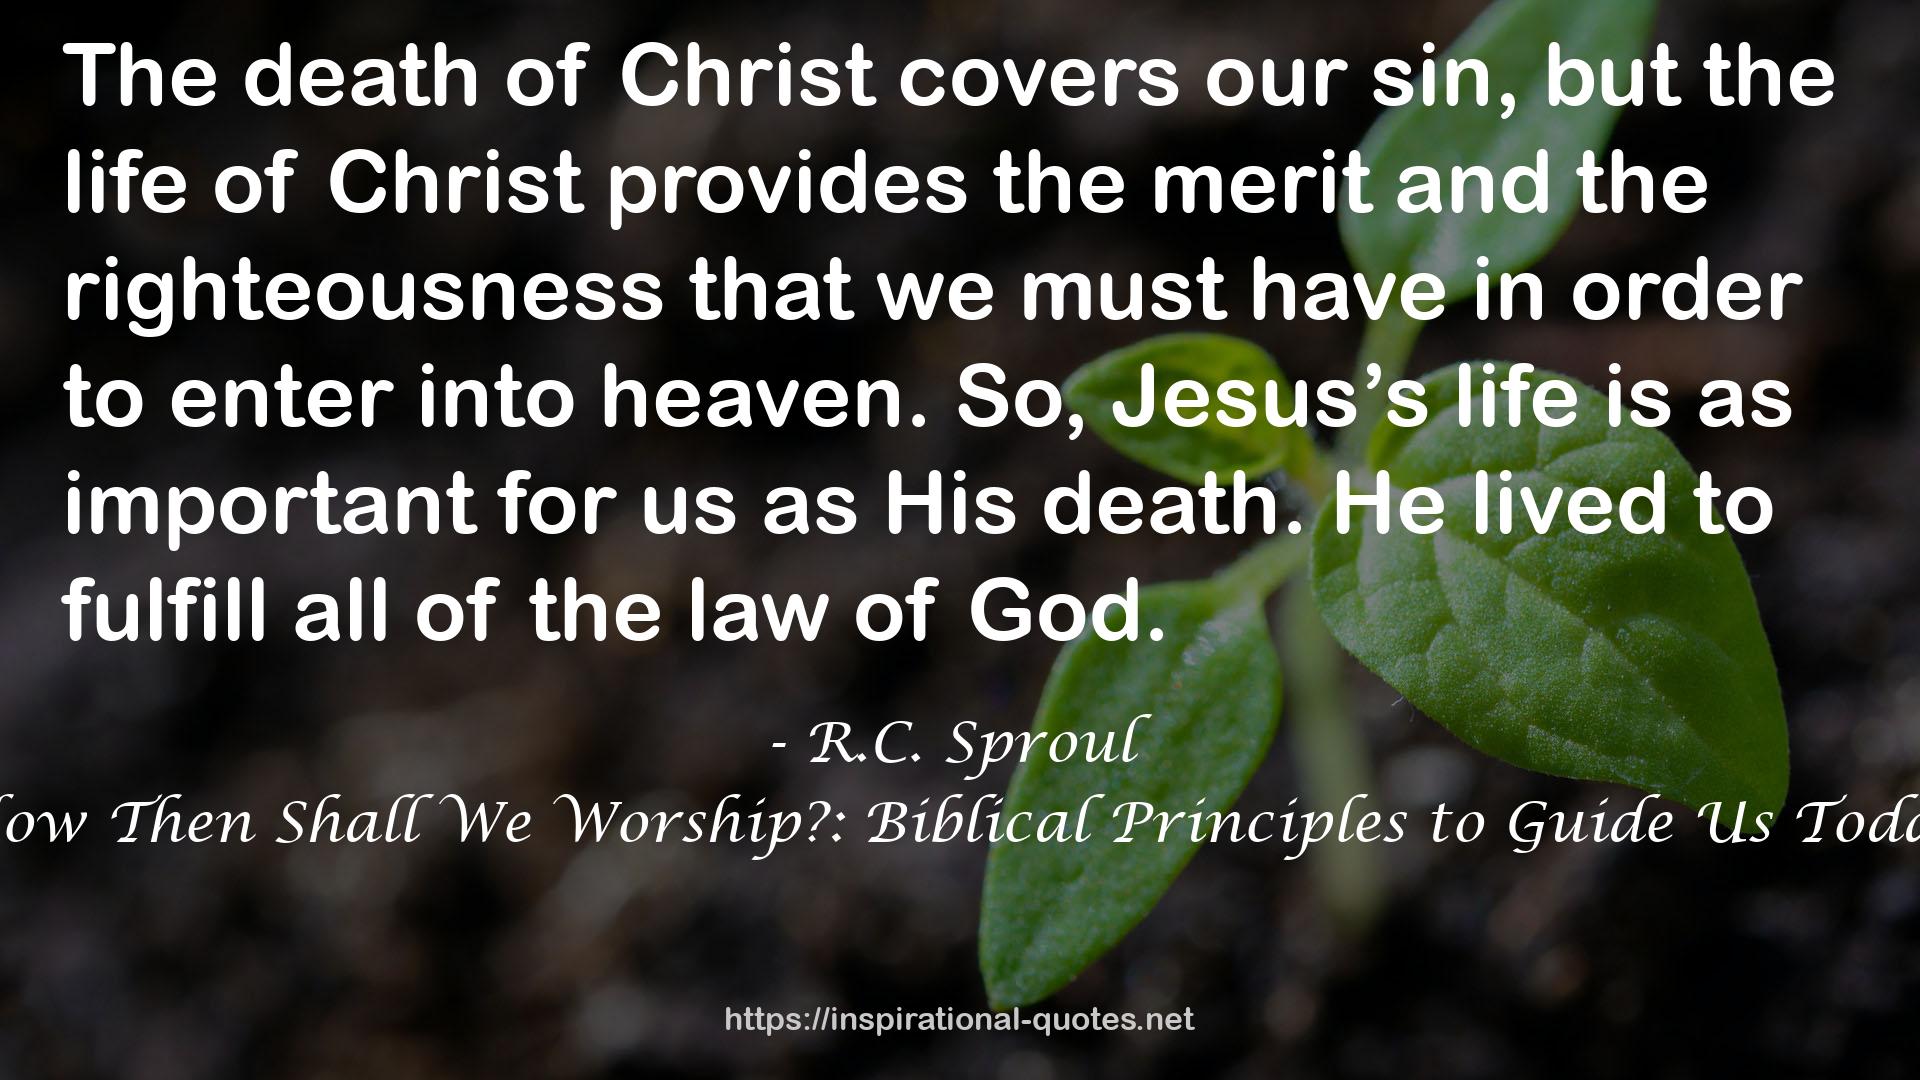 How Then Shall We Worship?: Biblical Principles to Guide Us Today QUOTES